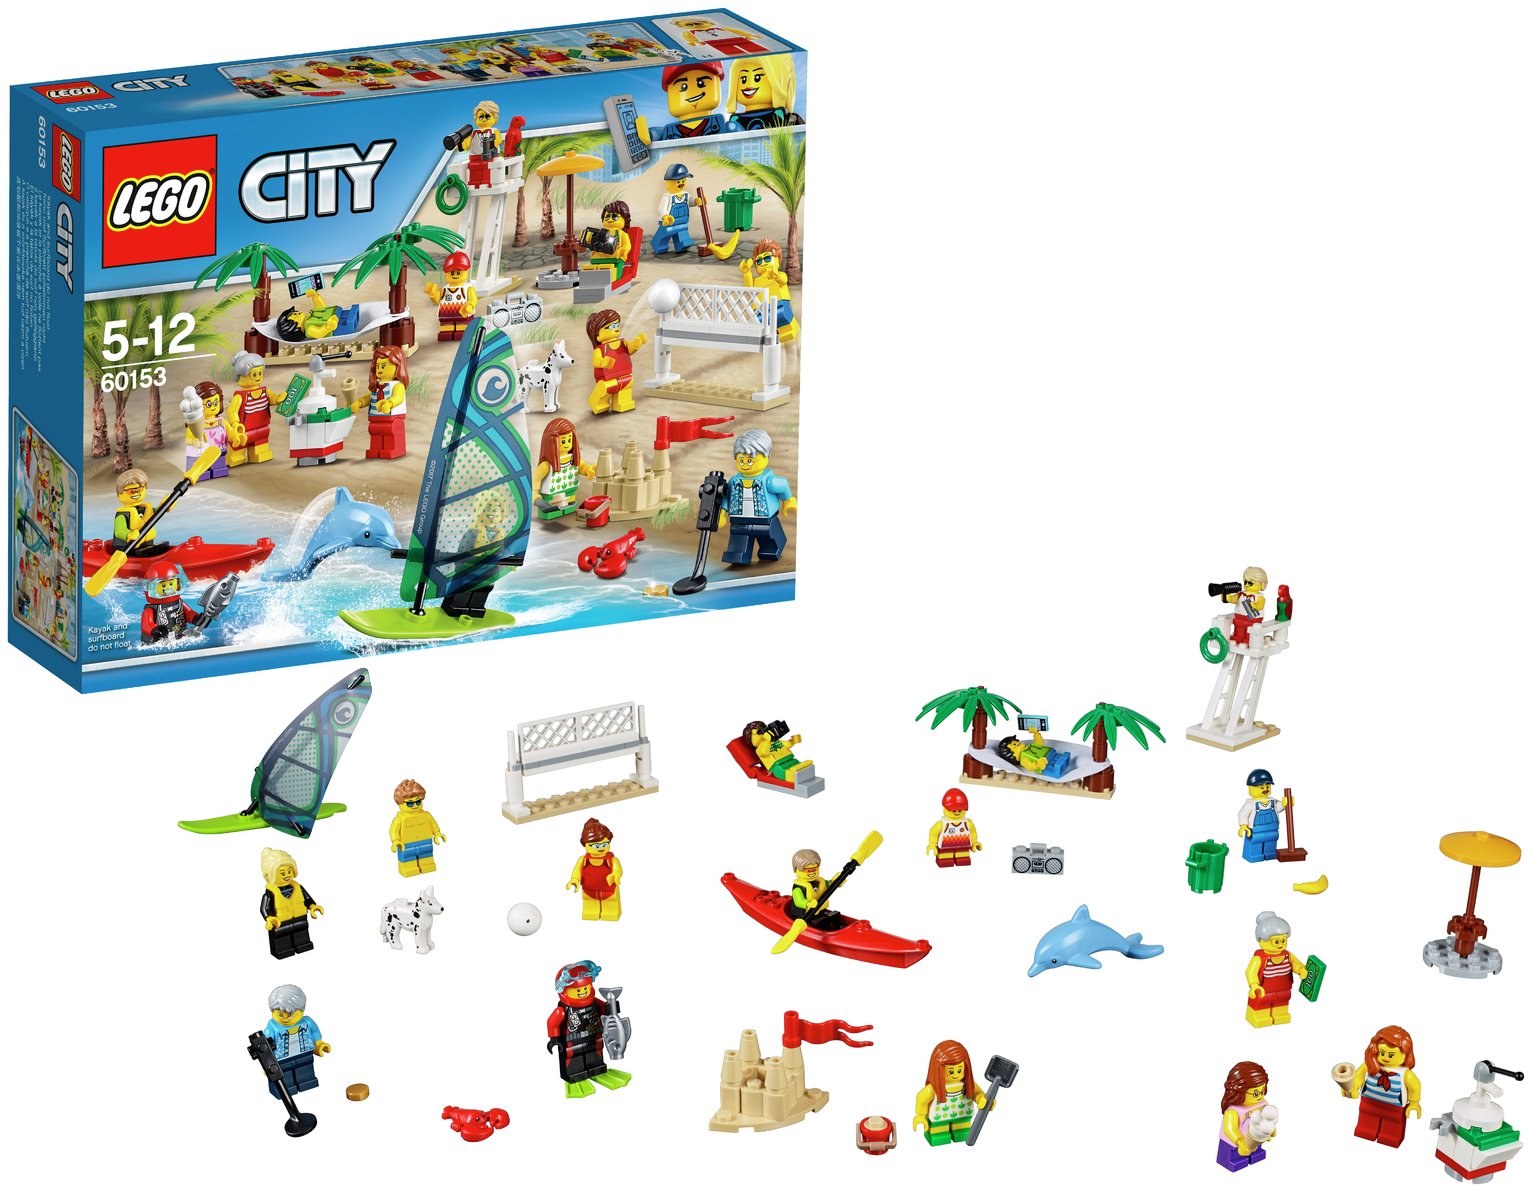 LEGO City People Pack Fun at the Beach - 60153